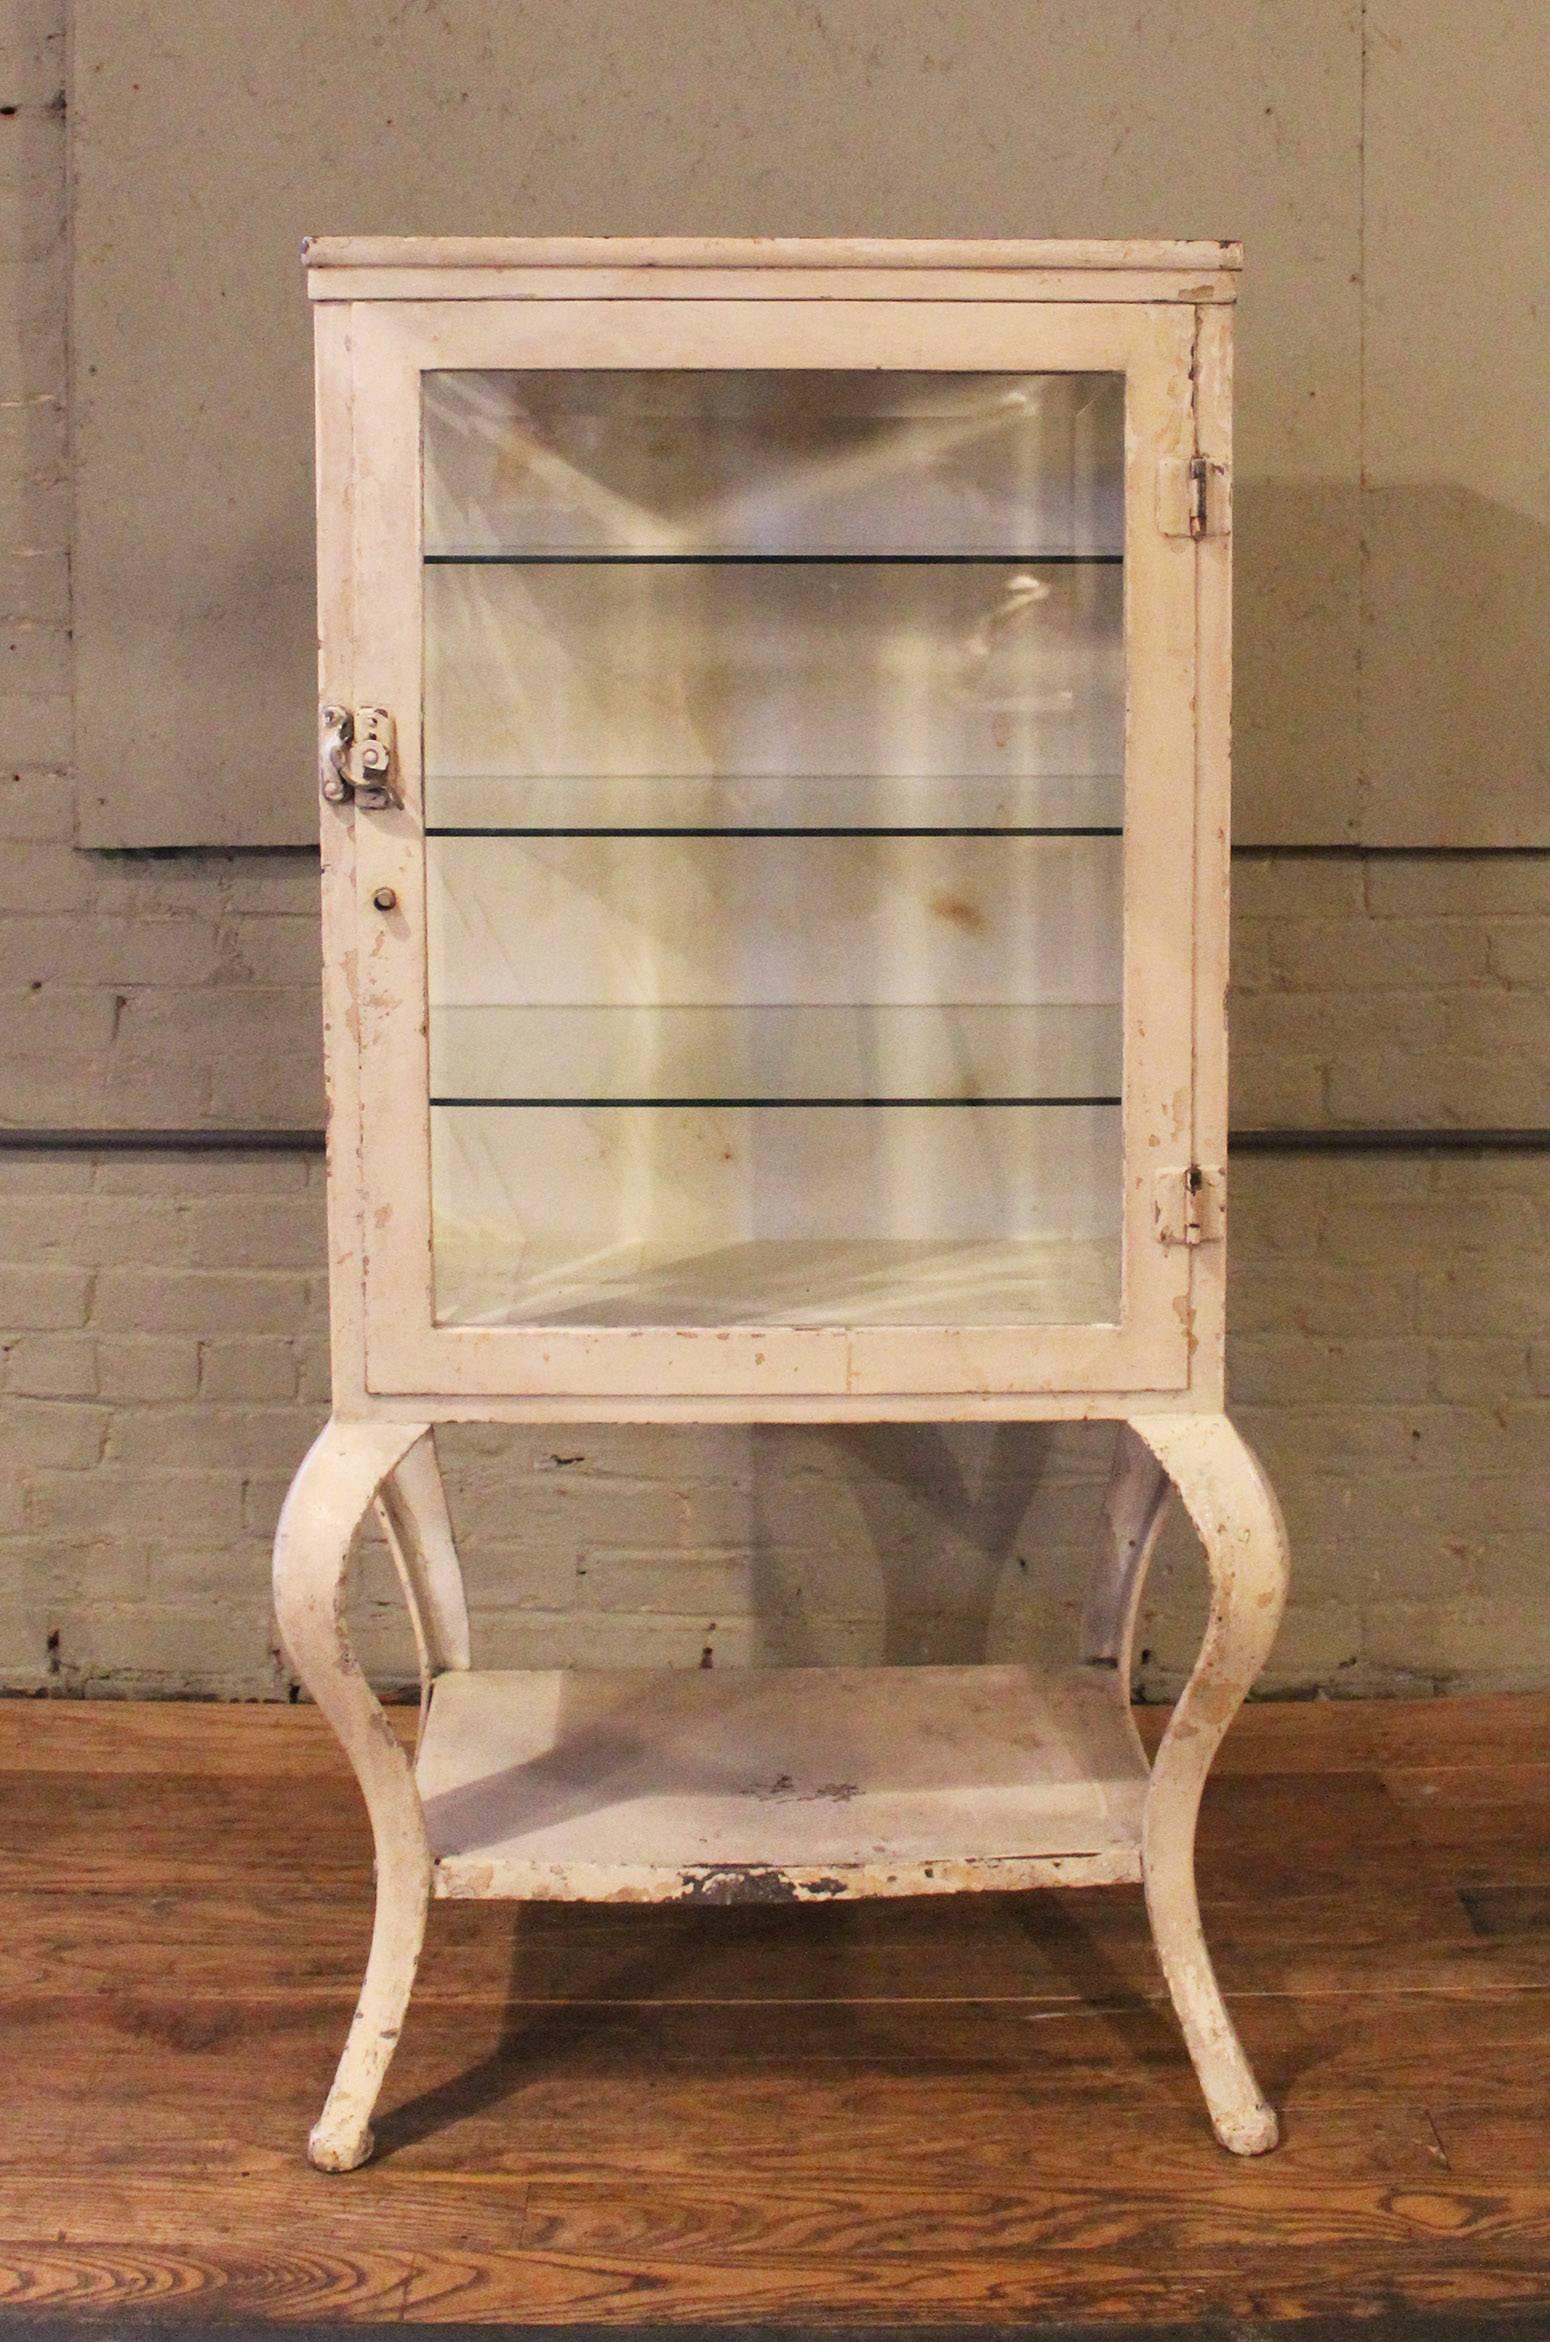 Vintage Industrial antique steel, metal and glass medical, pharmacy storage cabinet with three glass shelves and cabriole legs. Beautiful patina, worn ivory paint. Overall dimensions are 28" x 19 3/4" x 52 3/4". Bottom shelf measures